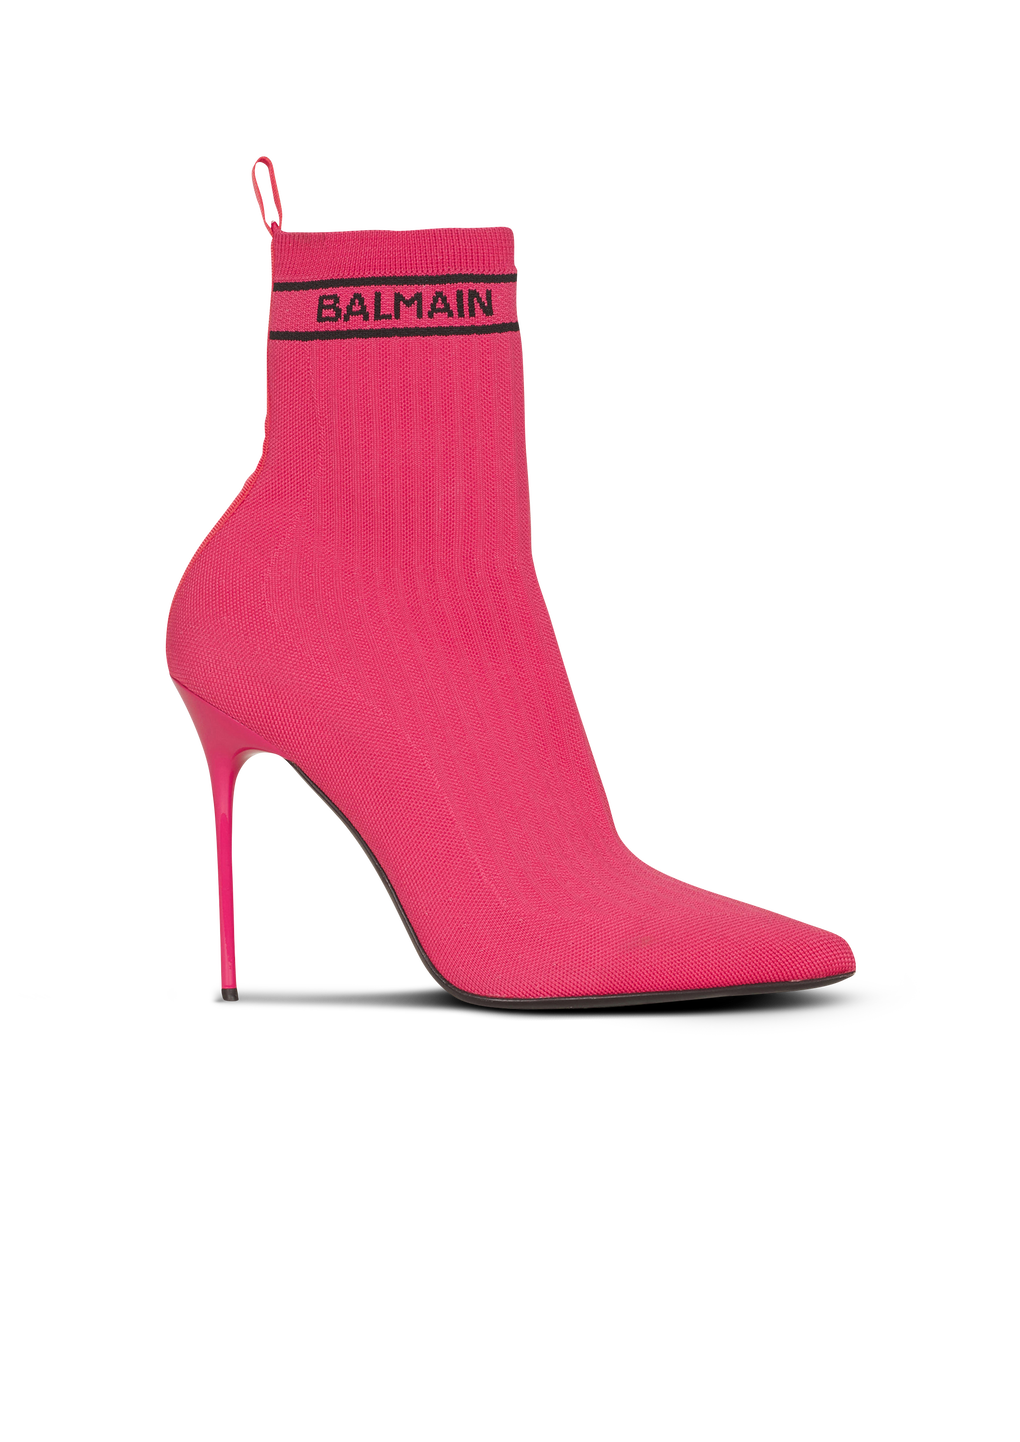 Stretch knit Skye ankle boots, pink, hi-res